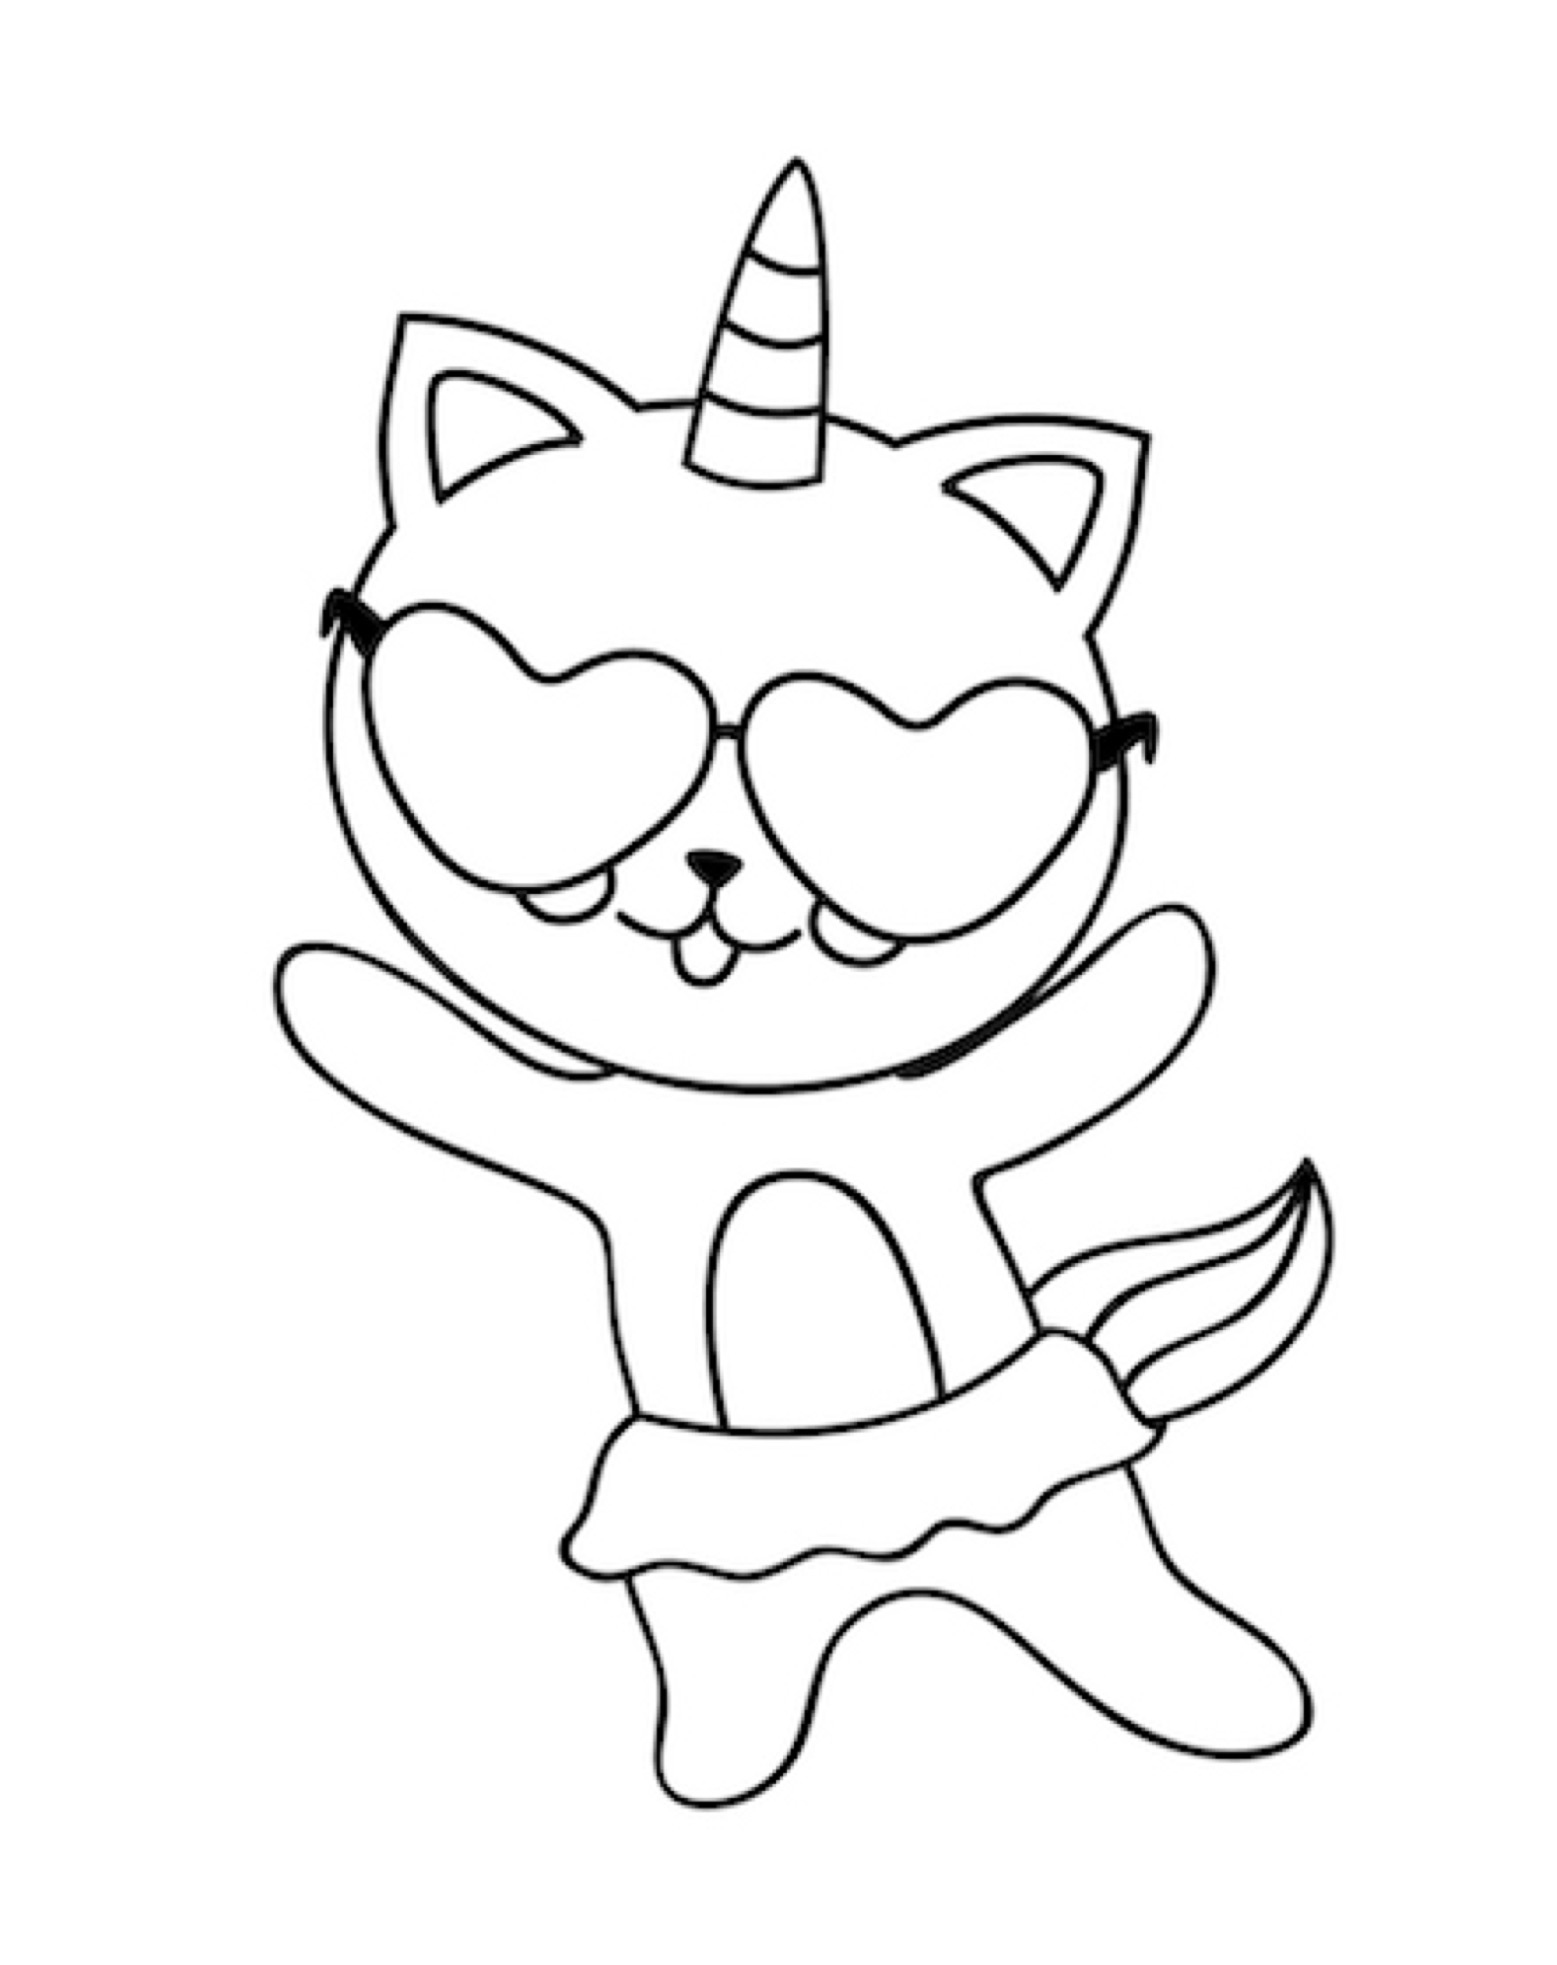 unicorn-kitty-coloring-page-printable-dancing-unicorn-cat-coloring